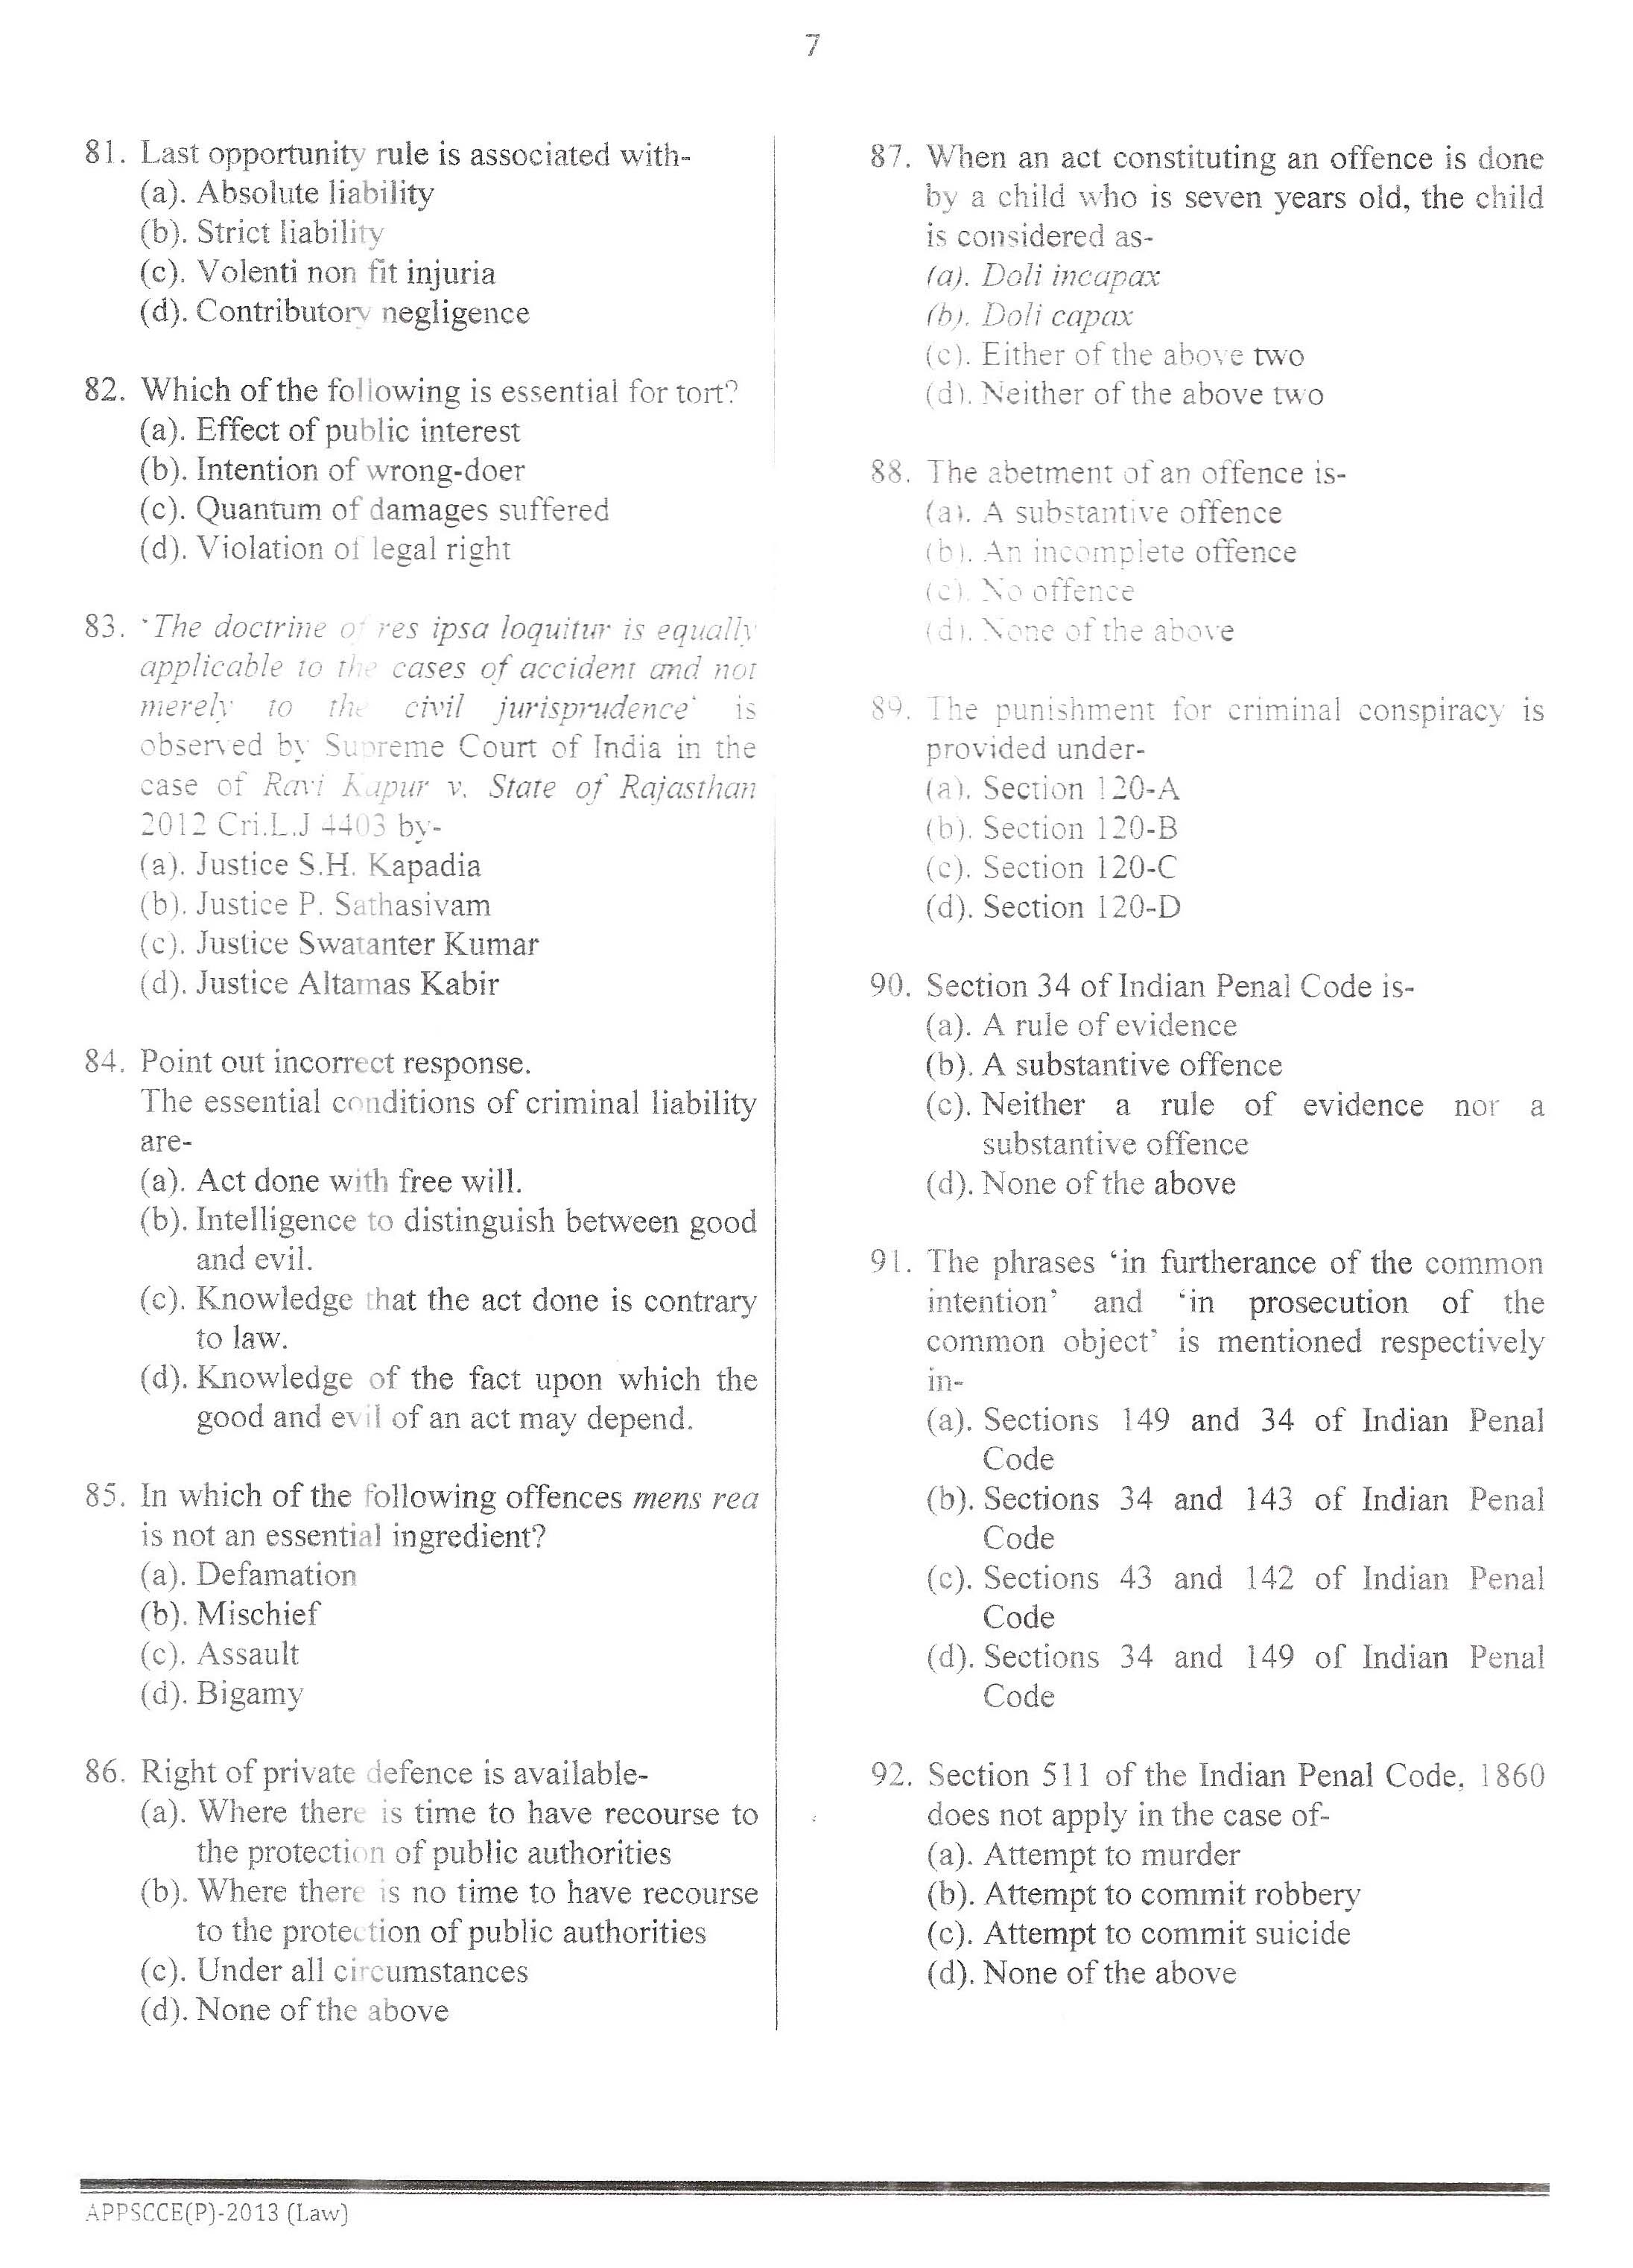 APPSC Combined Competitive Prelims Exam 2013 Law 8